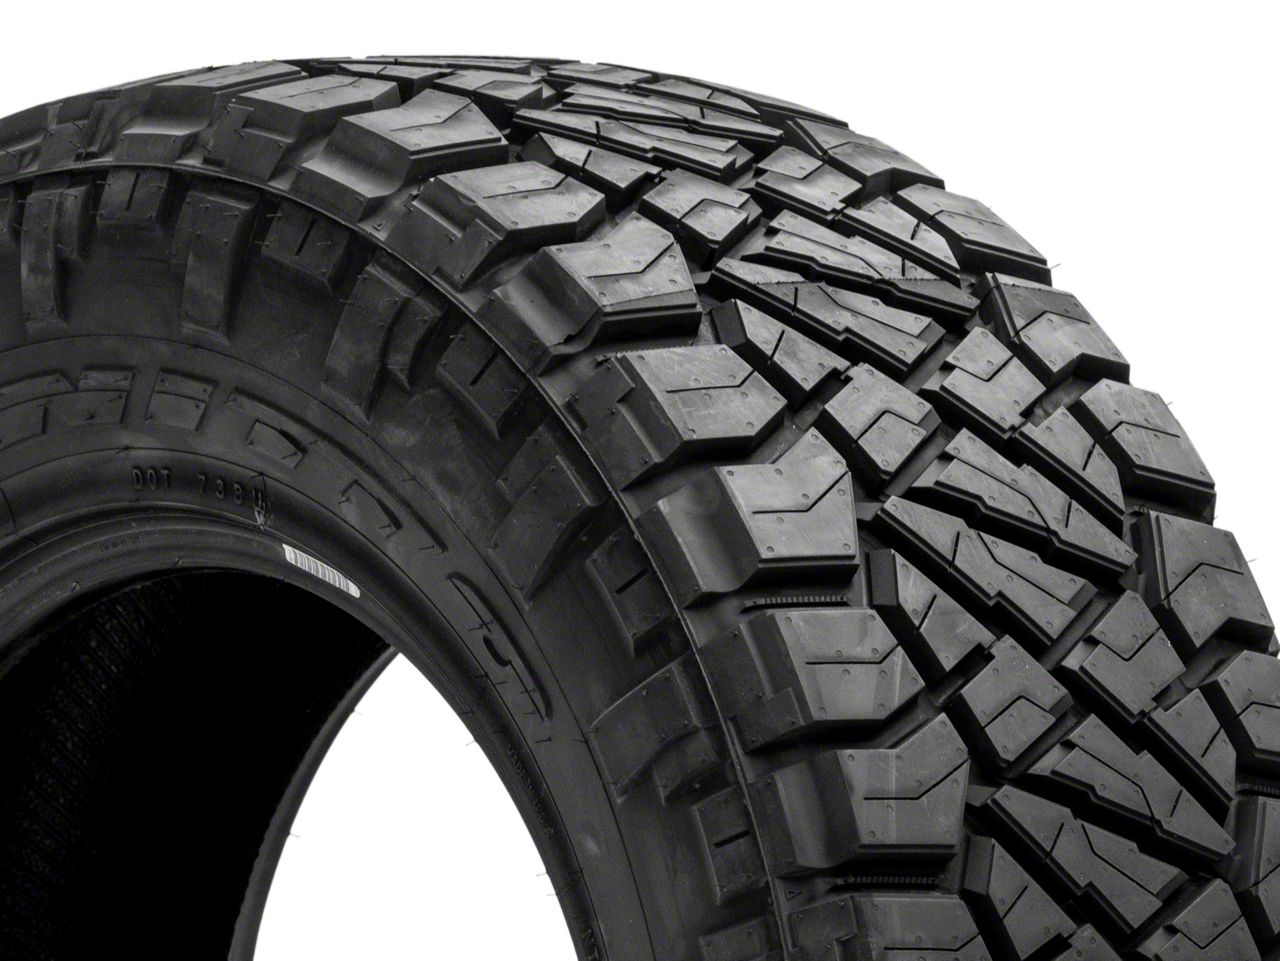 Nitto F 150 Ridge Grappler Tire T530651 Available From 31 In To 35 In